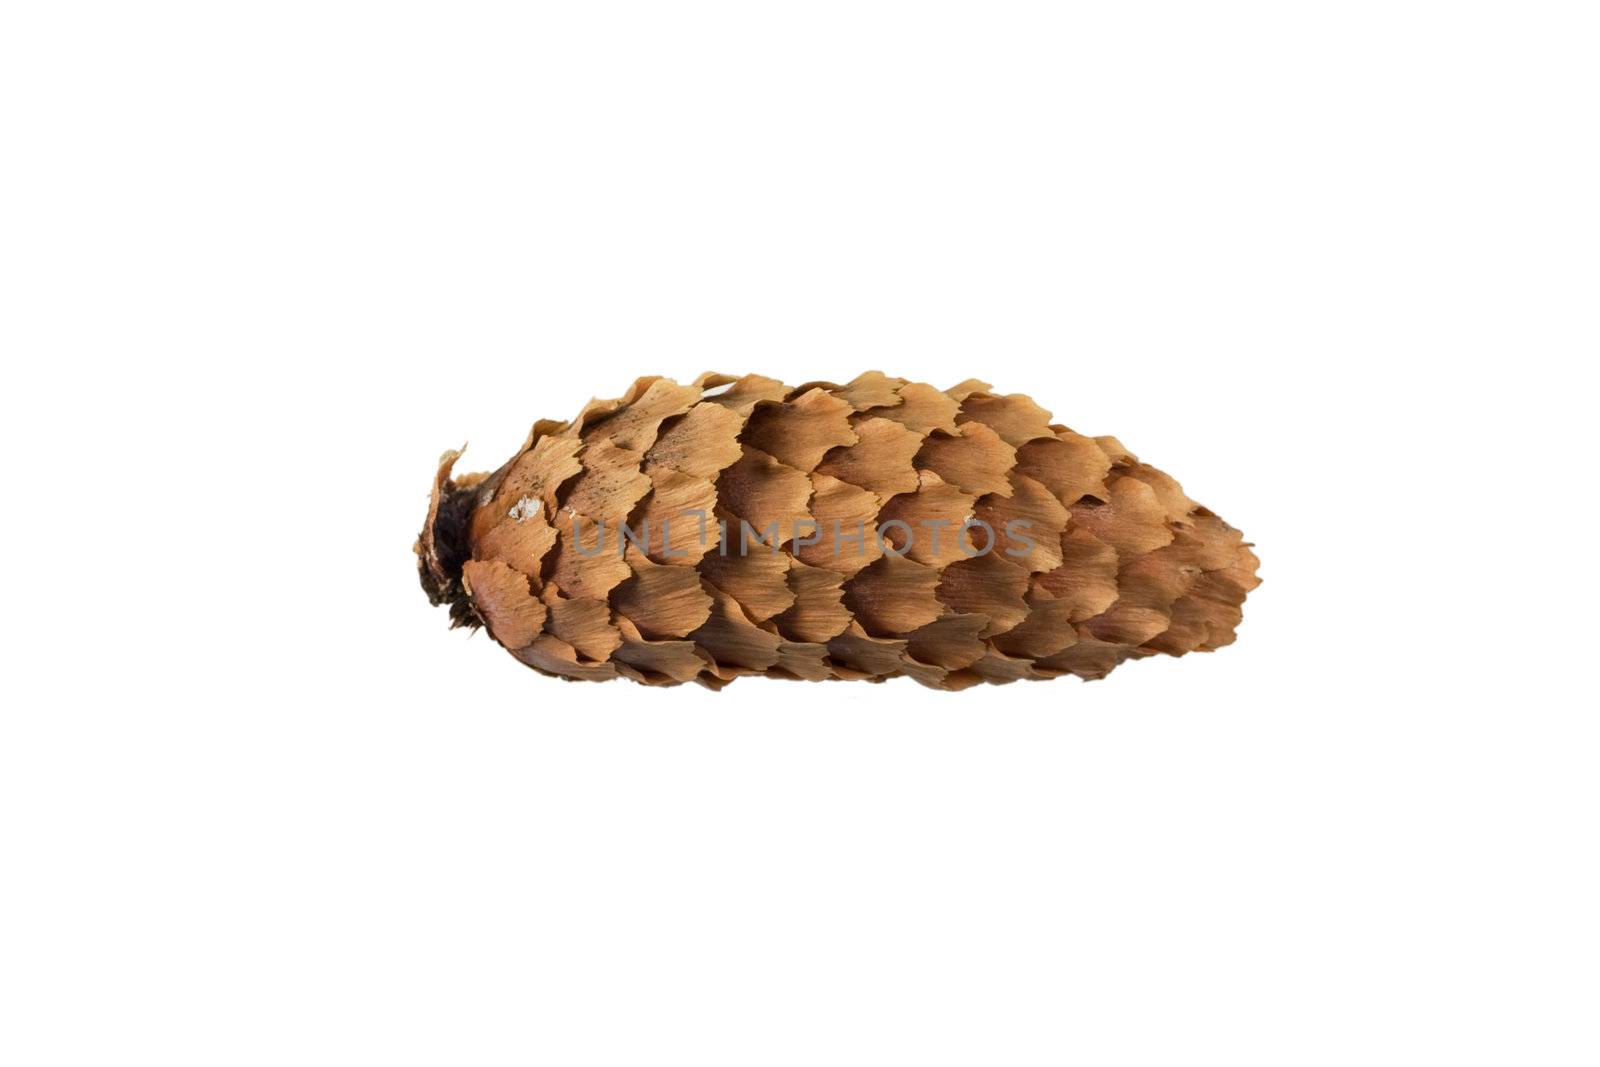 Small isolated evergreen pinecone